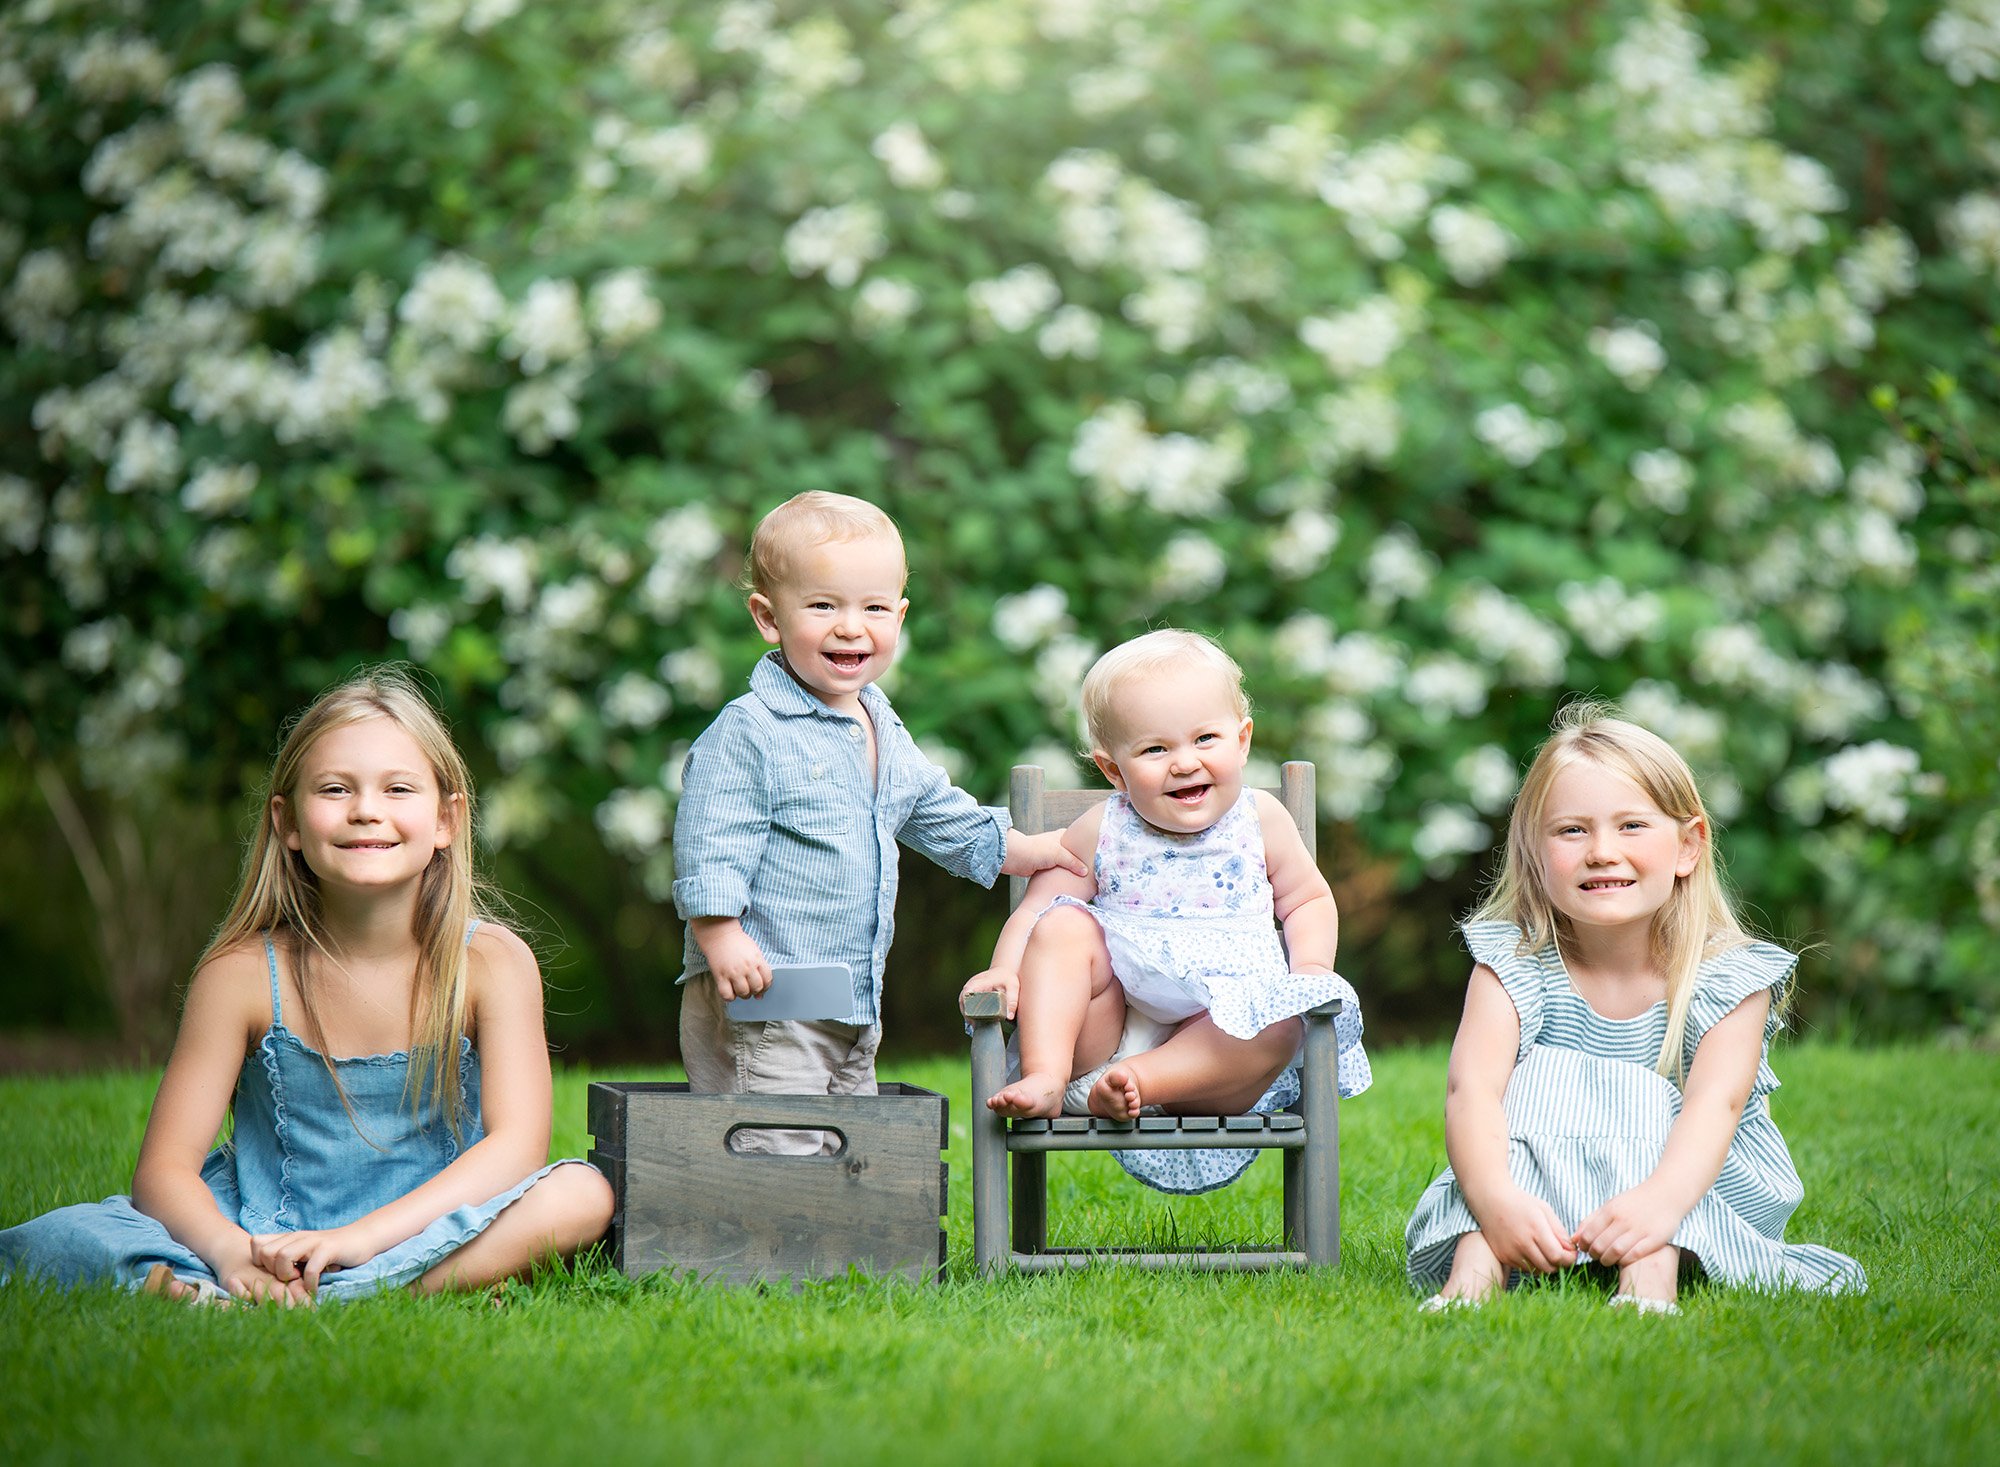 1 year old twins with siblings photoshoot